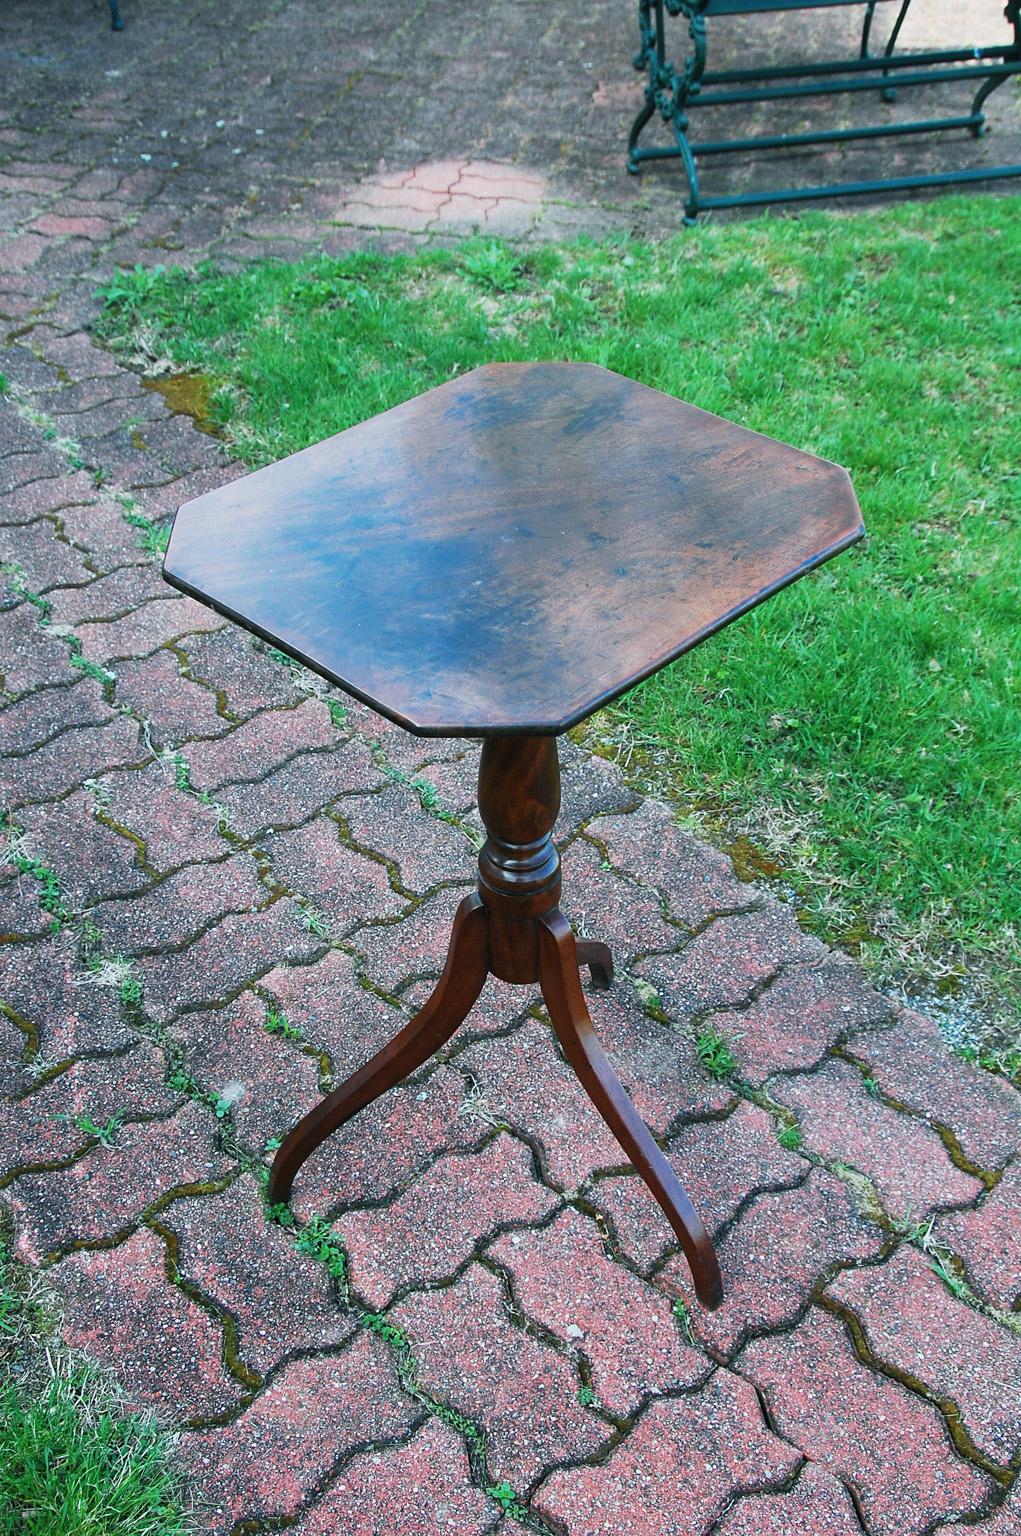 American early 19th century mahogany octagonal tripod candle Stand. This tilt top table is supported by a hand turned stem and concave legs. The small size makes it a perfect table for next to a chair or sofa where space is a consideration. This